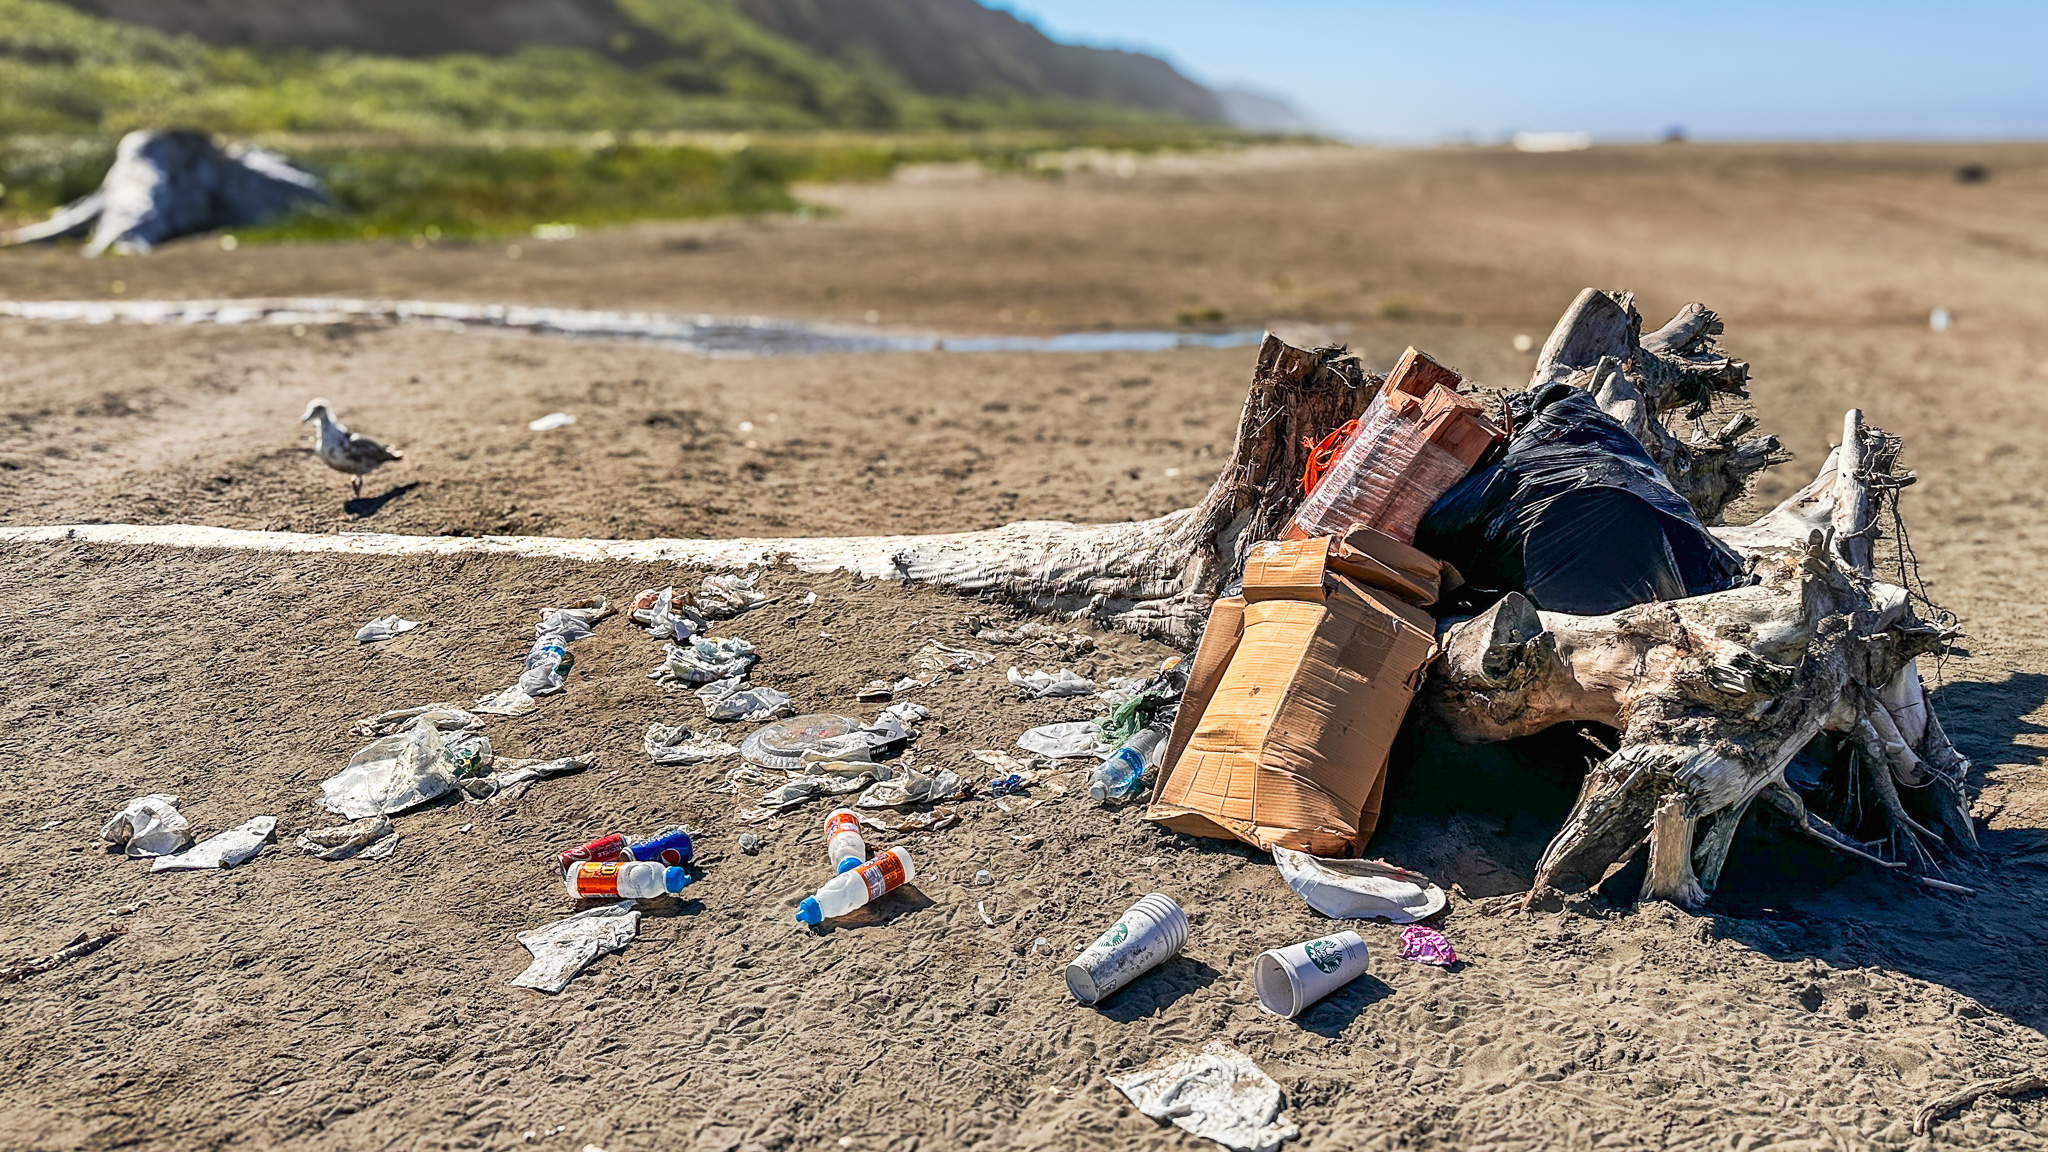 A pile of trash and litter purposely left on the beach at the Pacific Ocean